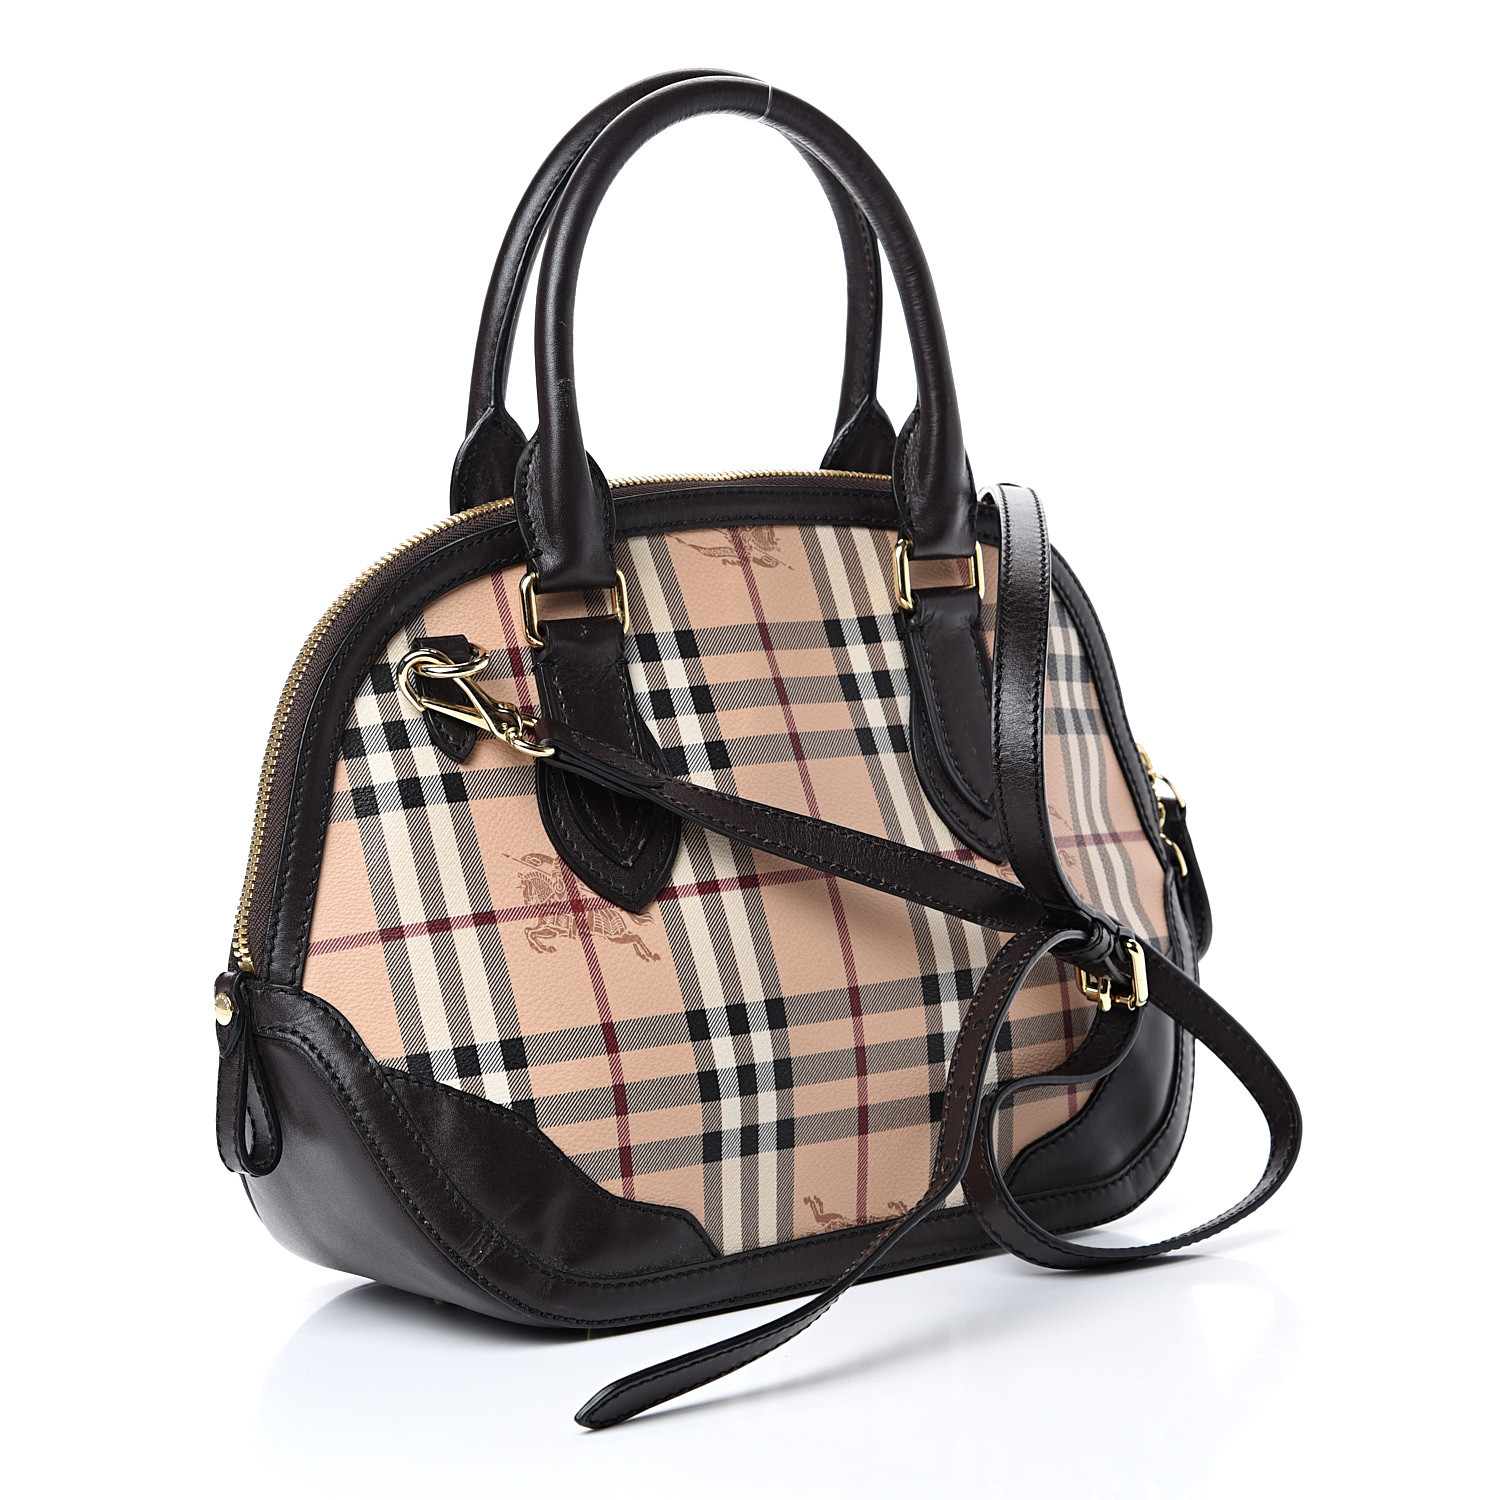 BURBERRY Haymarket Orchard Small Bowling Bag Chocolate 546812